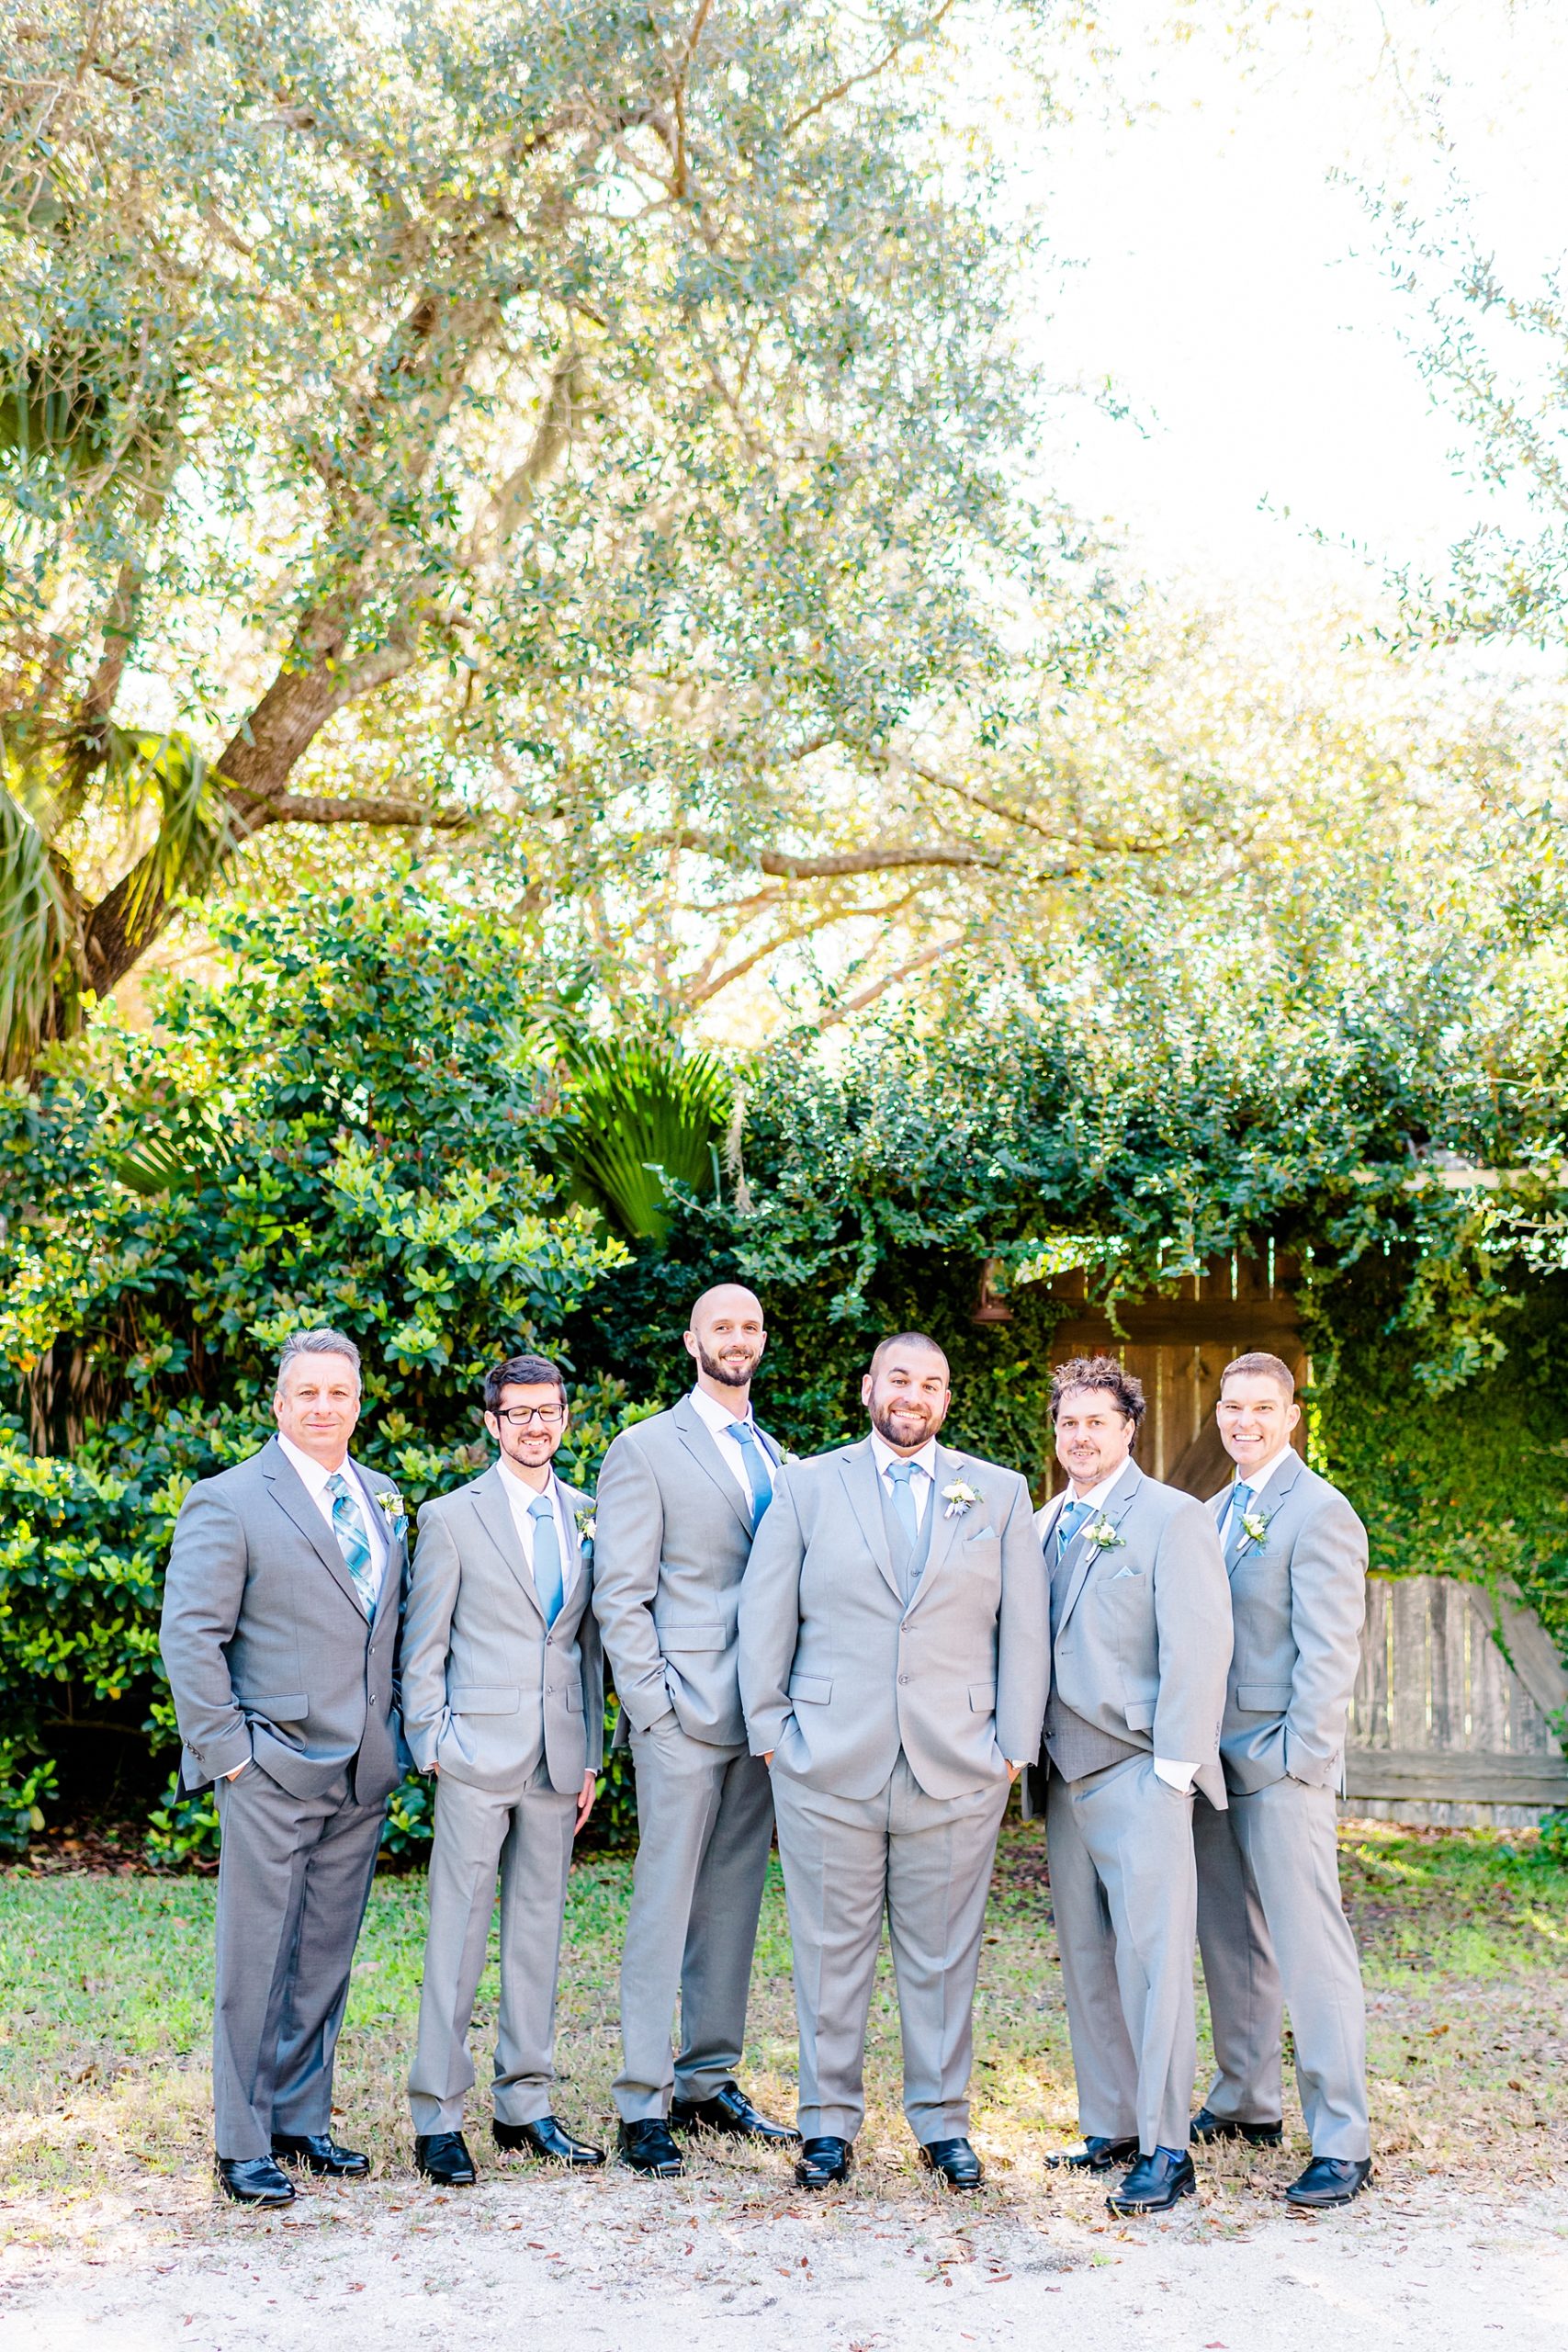 Wedding Photography Inspiration | The Delamater House Wedding | Chynna Pacheco Photography-354